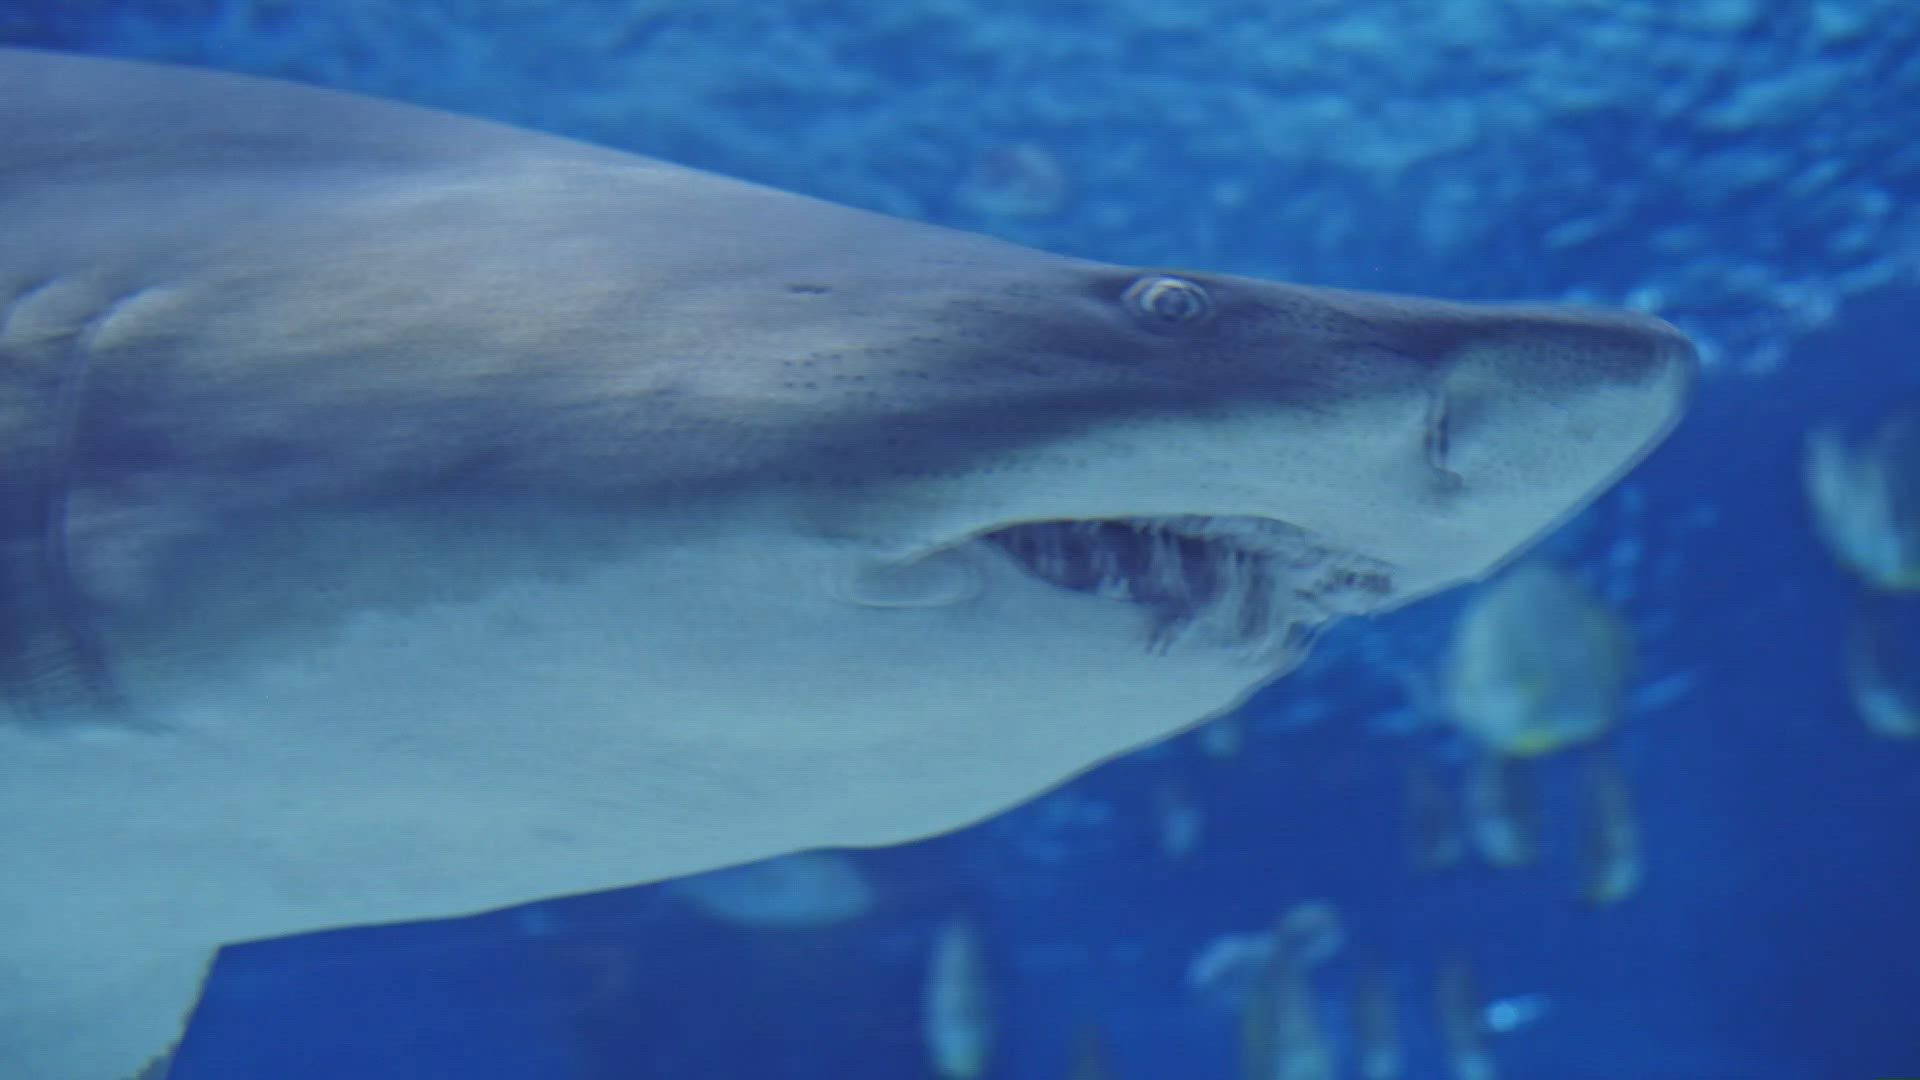 Experts provide tips on how to lower your chances of being approached by a shark.